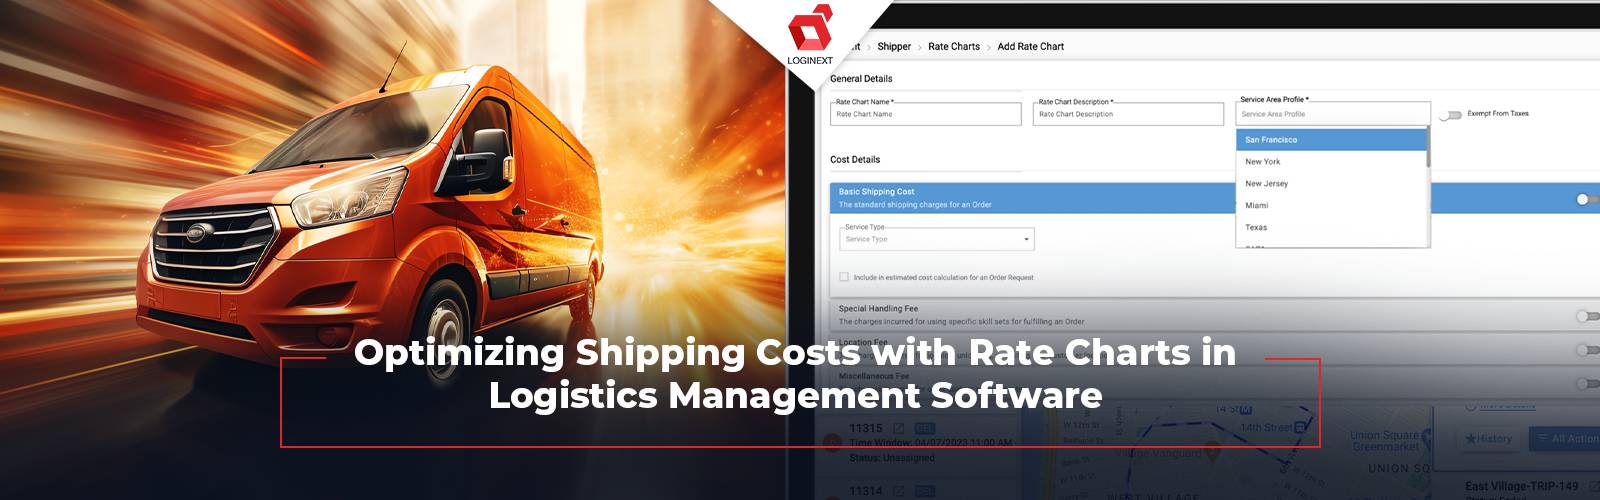 Rate Charts in Logistics Management Software